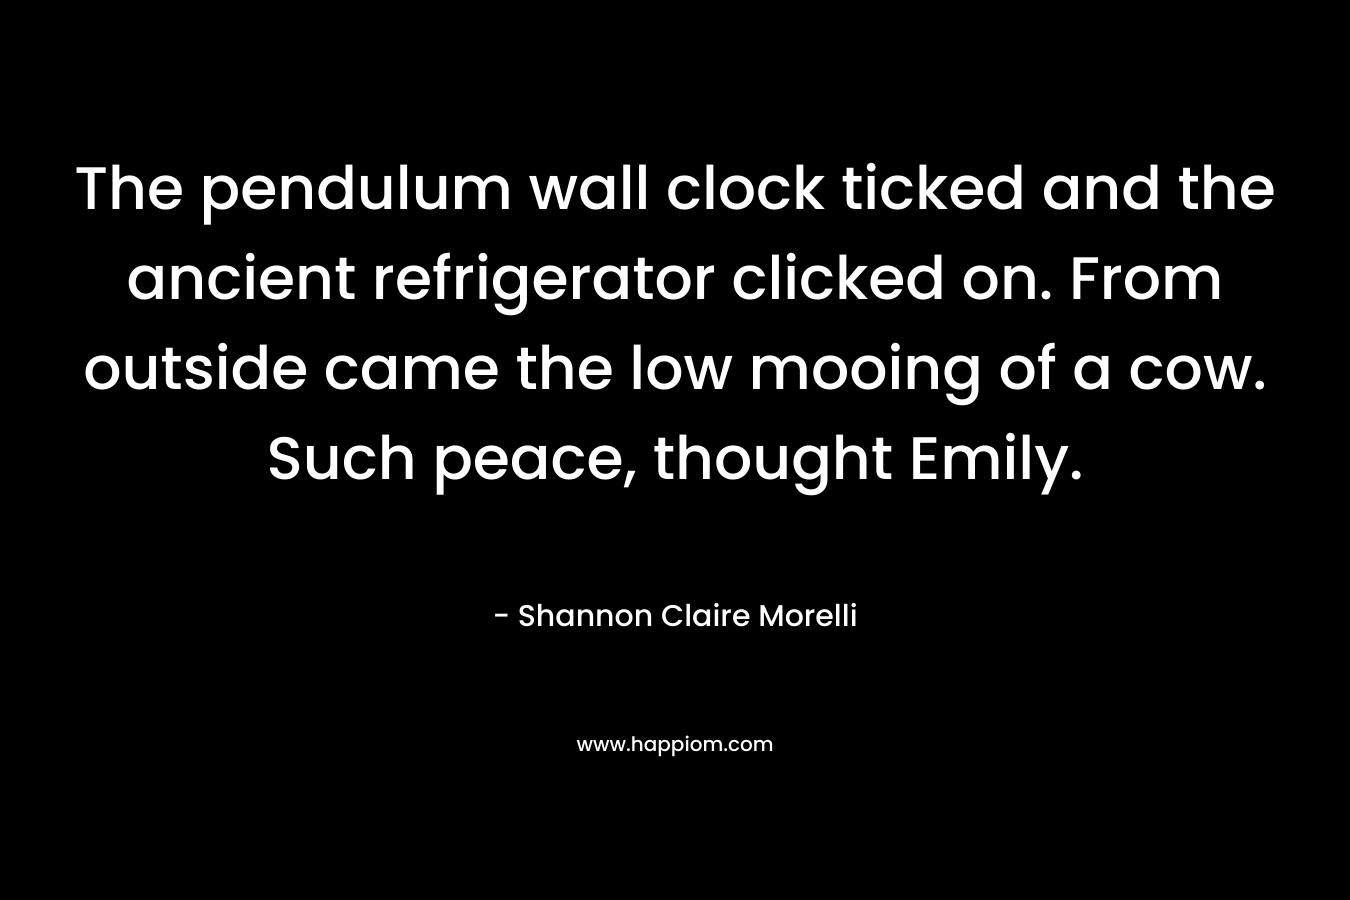 The pendulum wall clock ticked and the ancient refrigerator clicked on. From outside came the low mooing of a cow. Such peace, thought Emily. – Shannon Claire Morelli